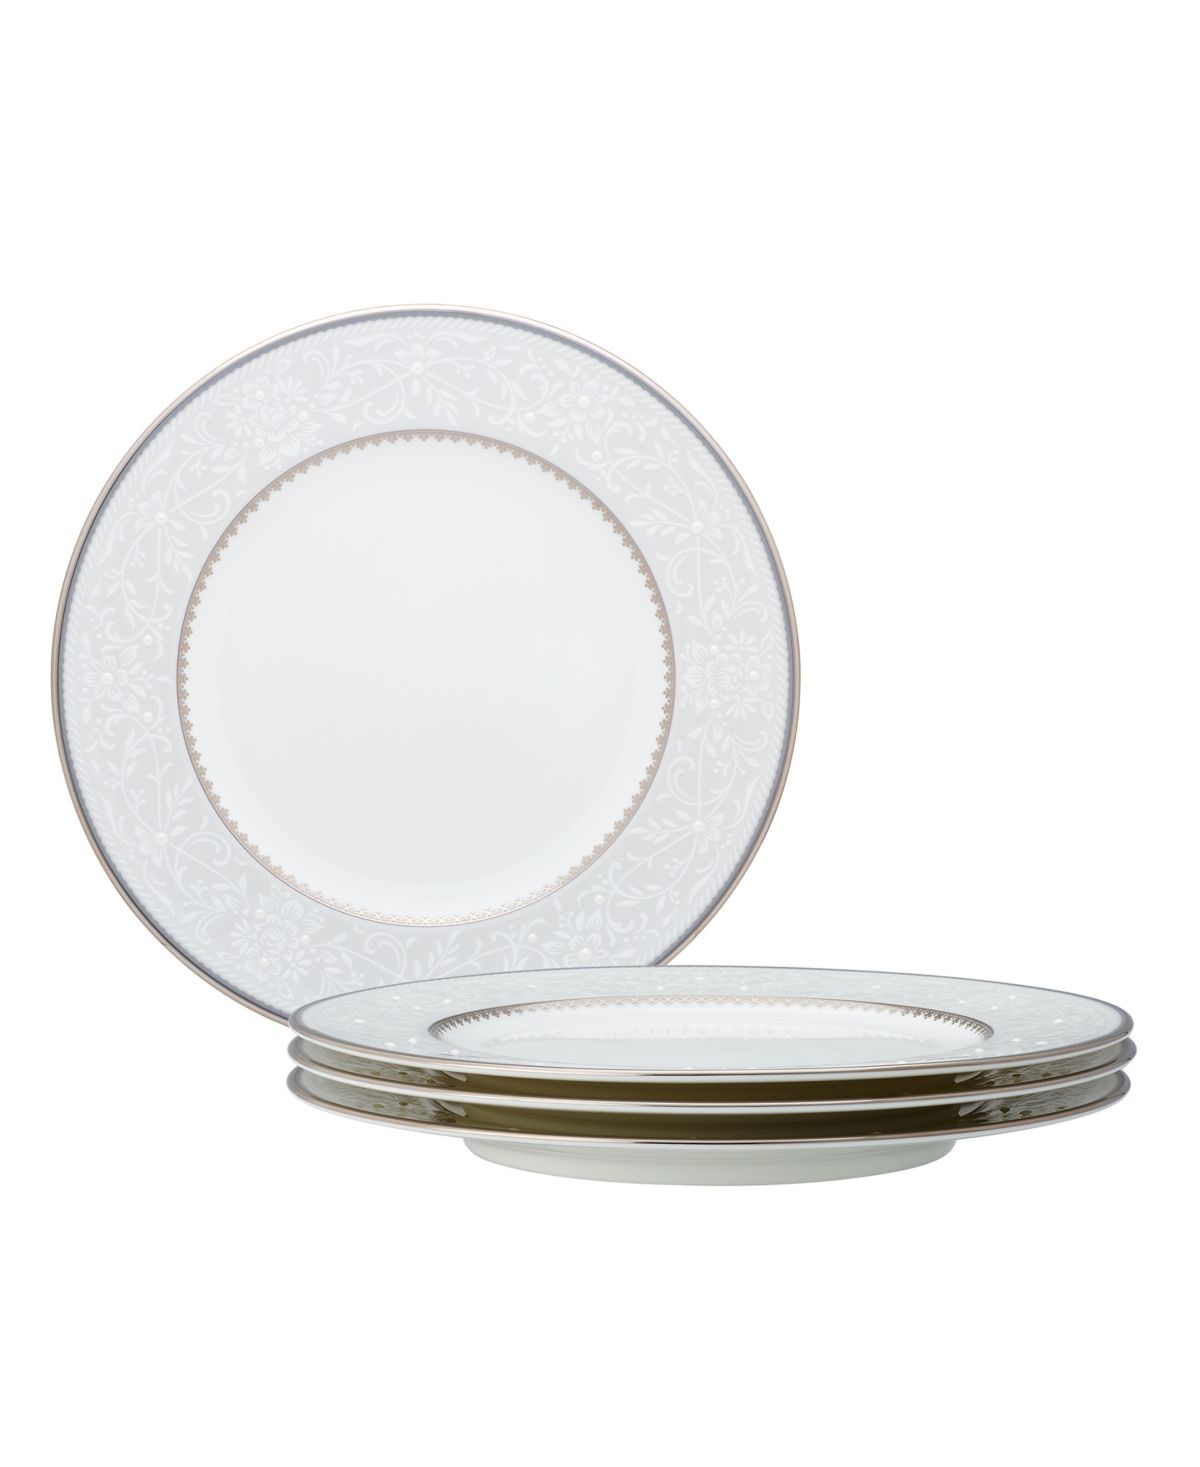 Noritake Brocato Set Of 4 Salad Plates, Service For 4 In Gray